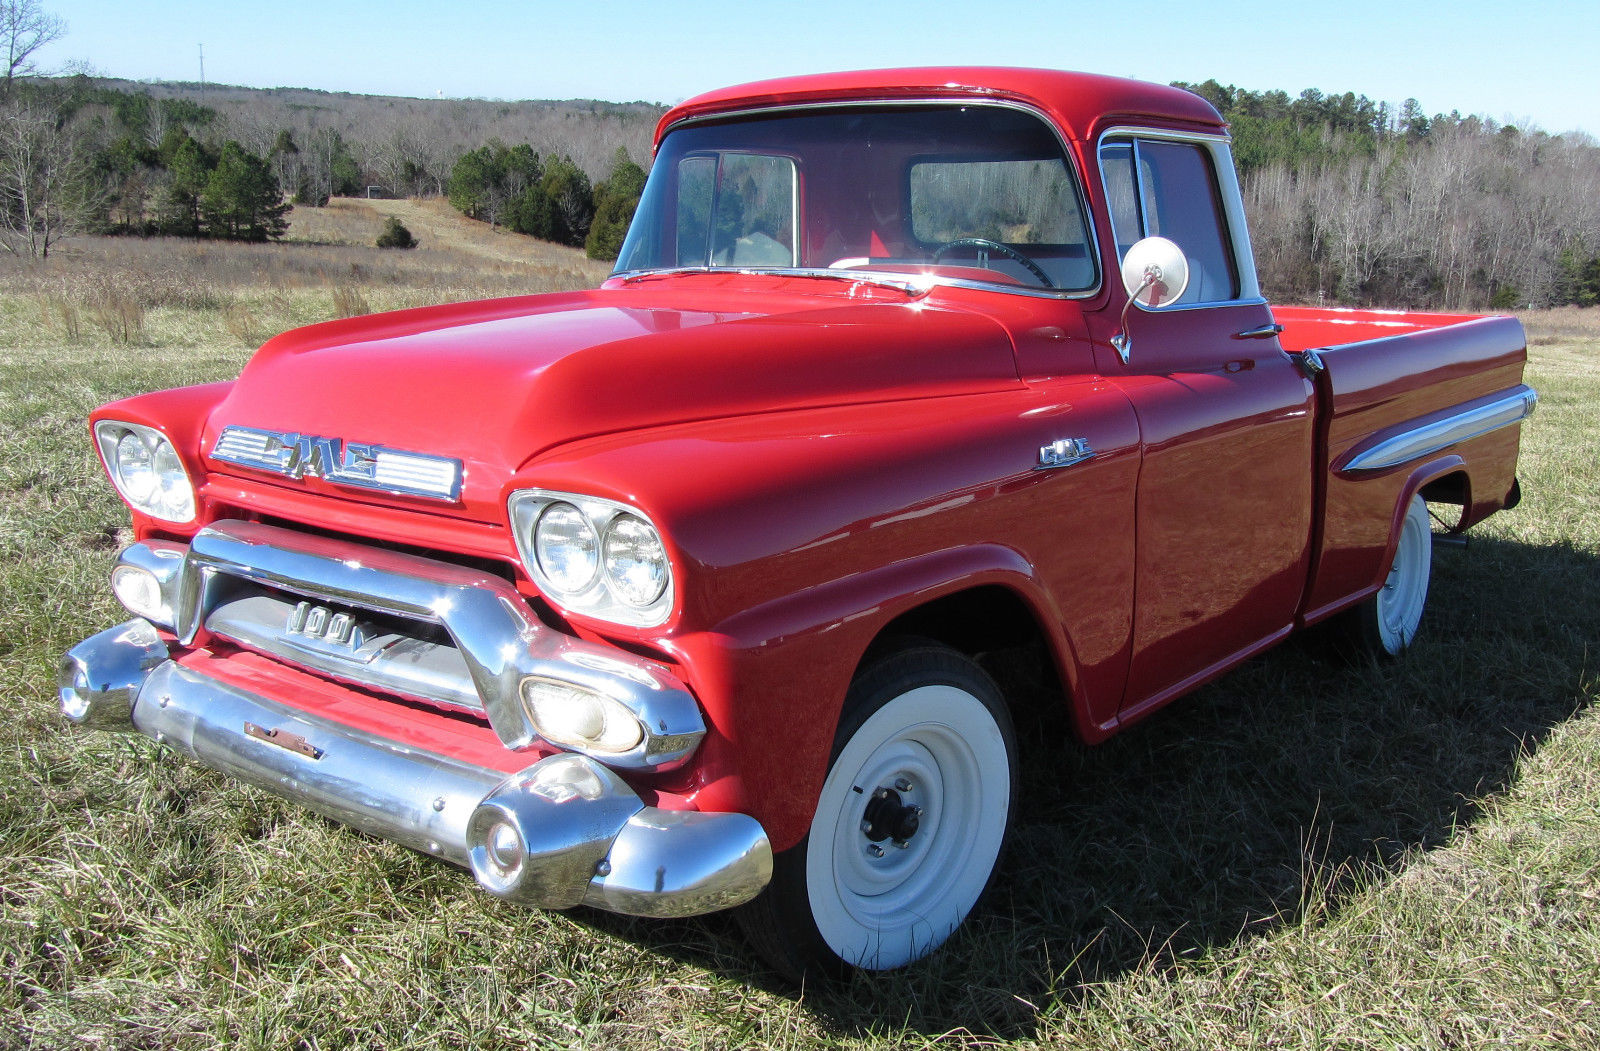 1958 GMC Fleetside Pickup - Classic Truck for sale in Boiling Springs, South Carolina, United States